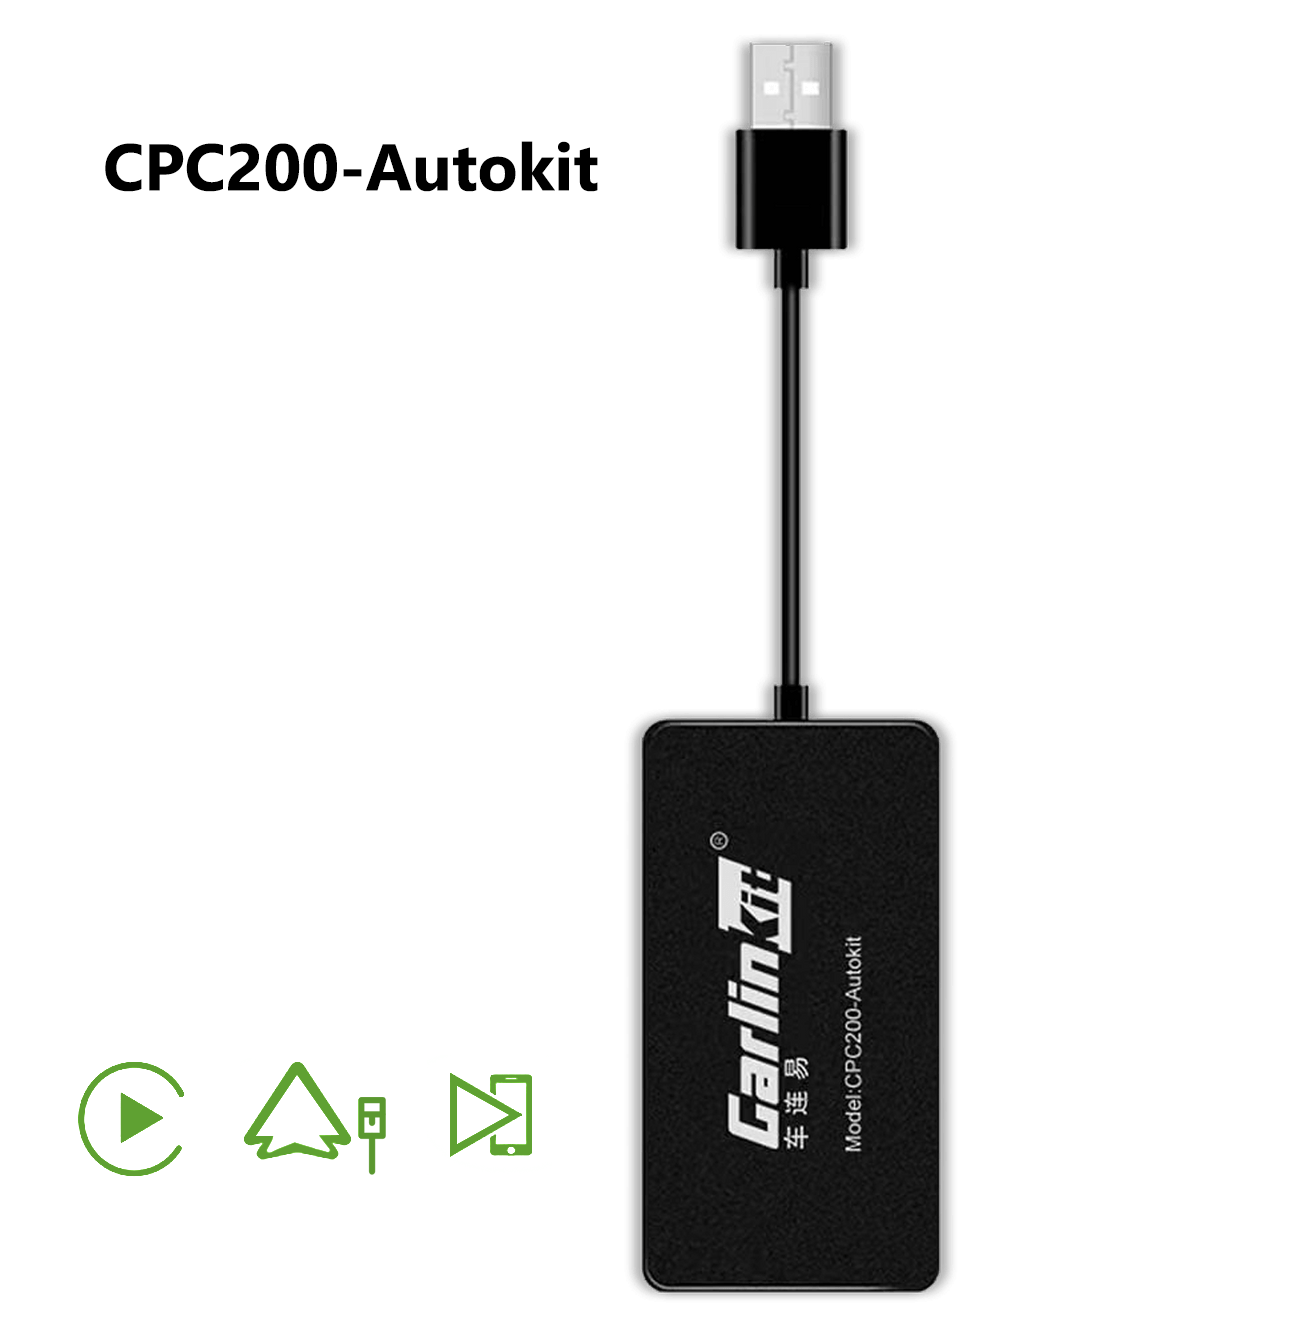 Autokit - Wireless CarPlay Dongle Special for Android Head Unit